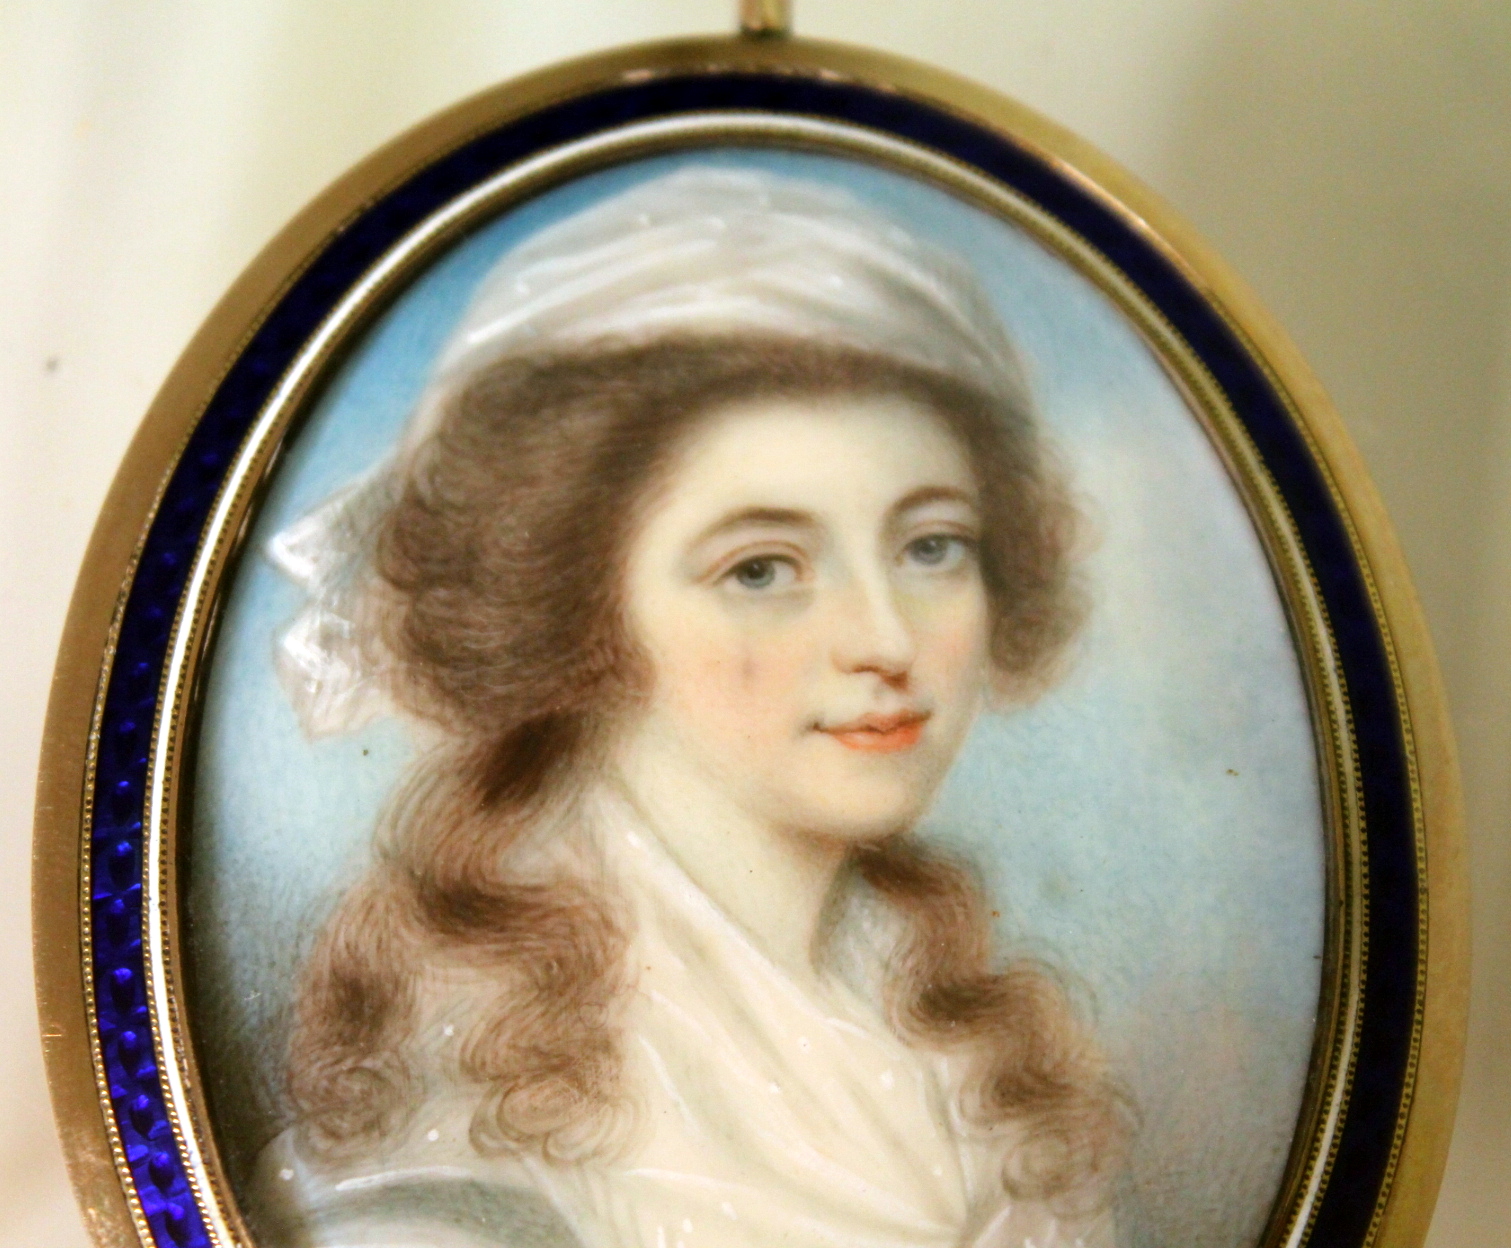 Late 18th century miniature portrait of a young woman with white bodice, bonnet & pearls, - Image 3 of 7